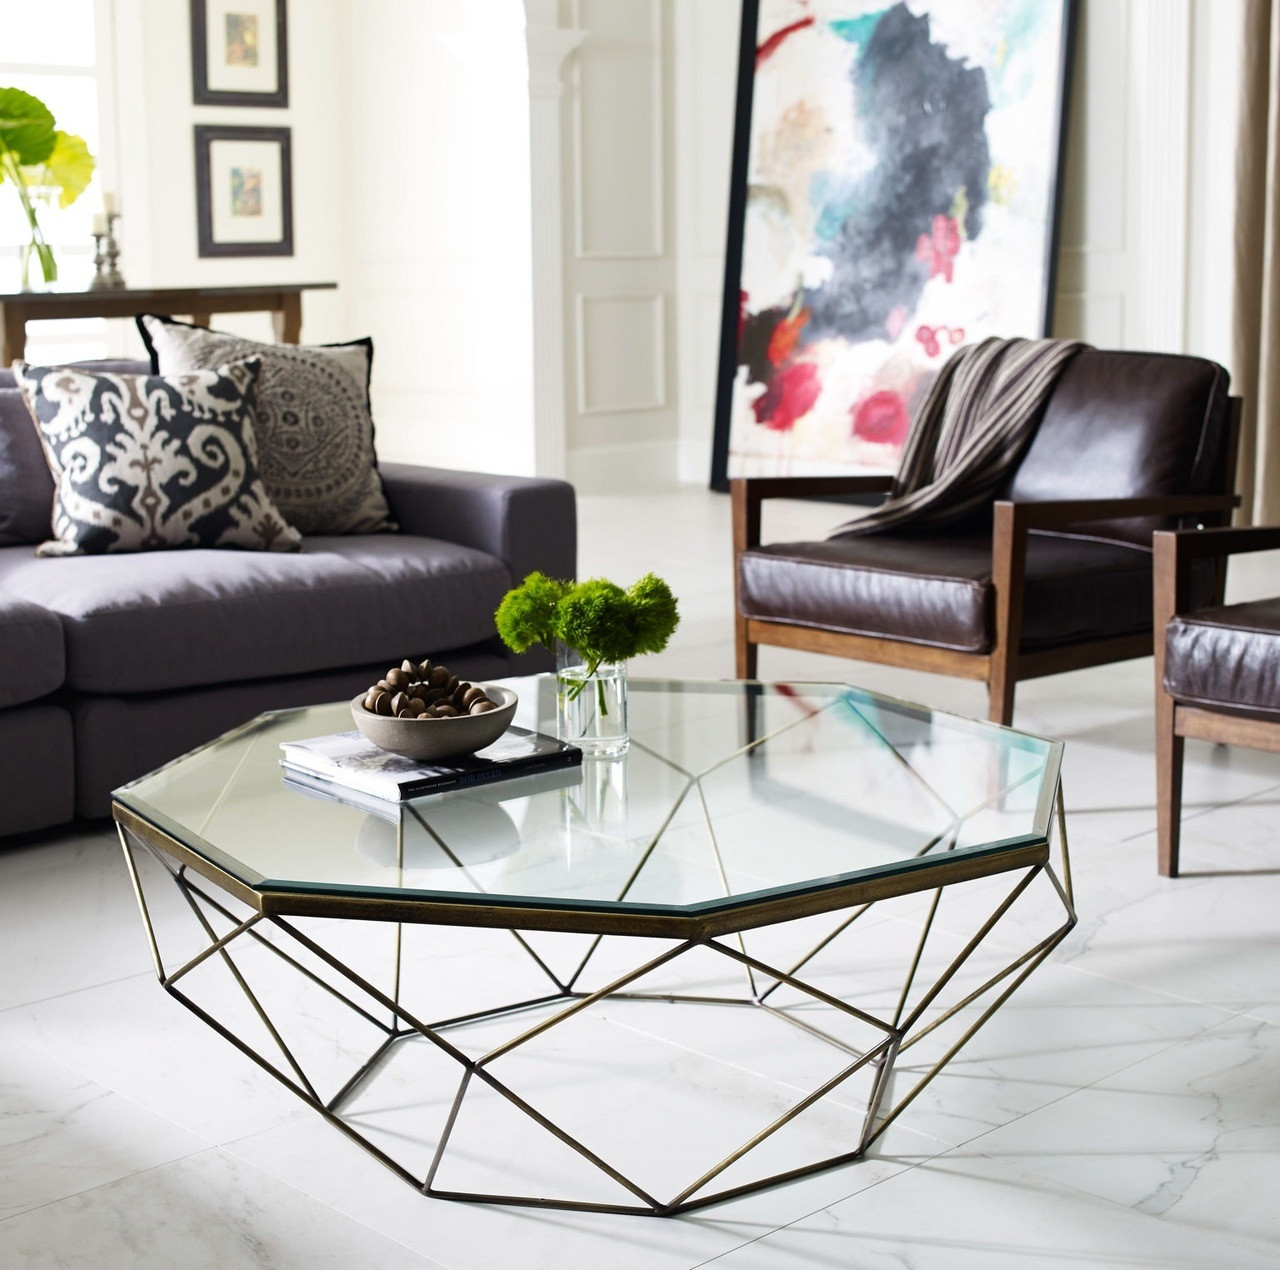 Living Room Glass Table
 30 Glass Coffee Tables that Bring Transparency to Your